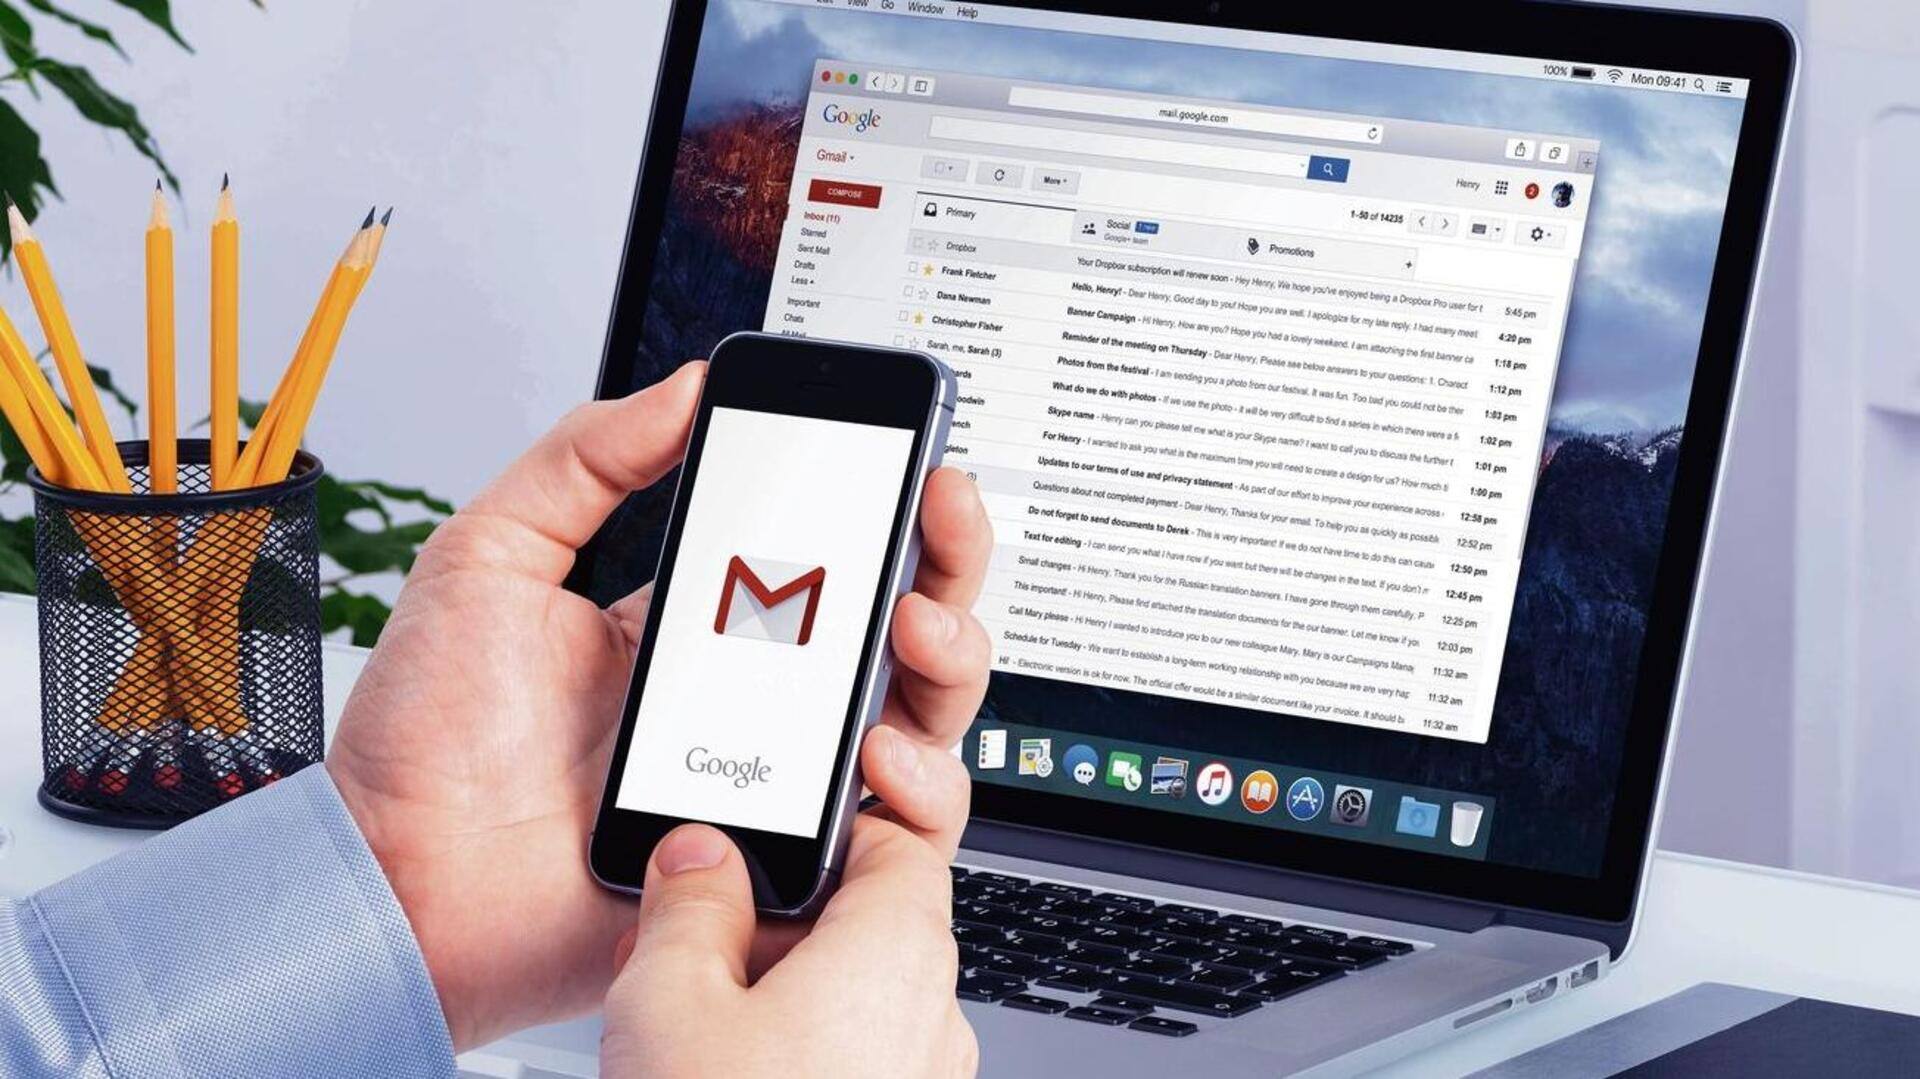 Google to delete inactive Gmail accounts: How to protect yours 